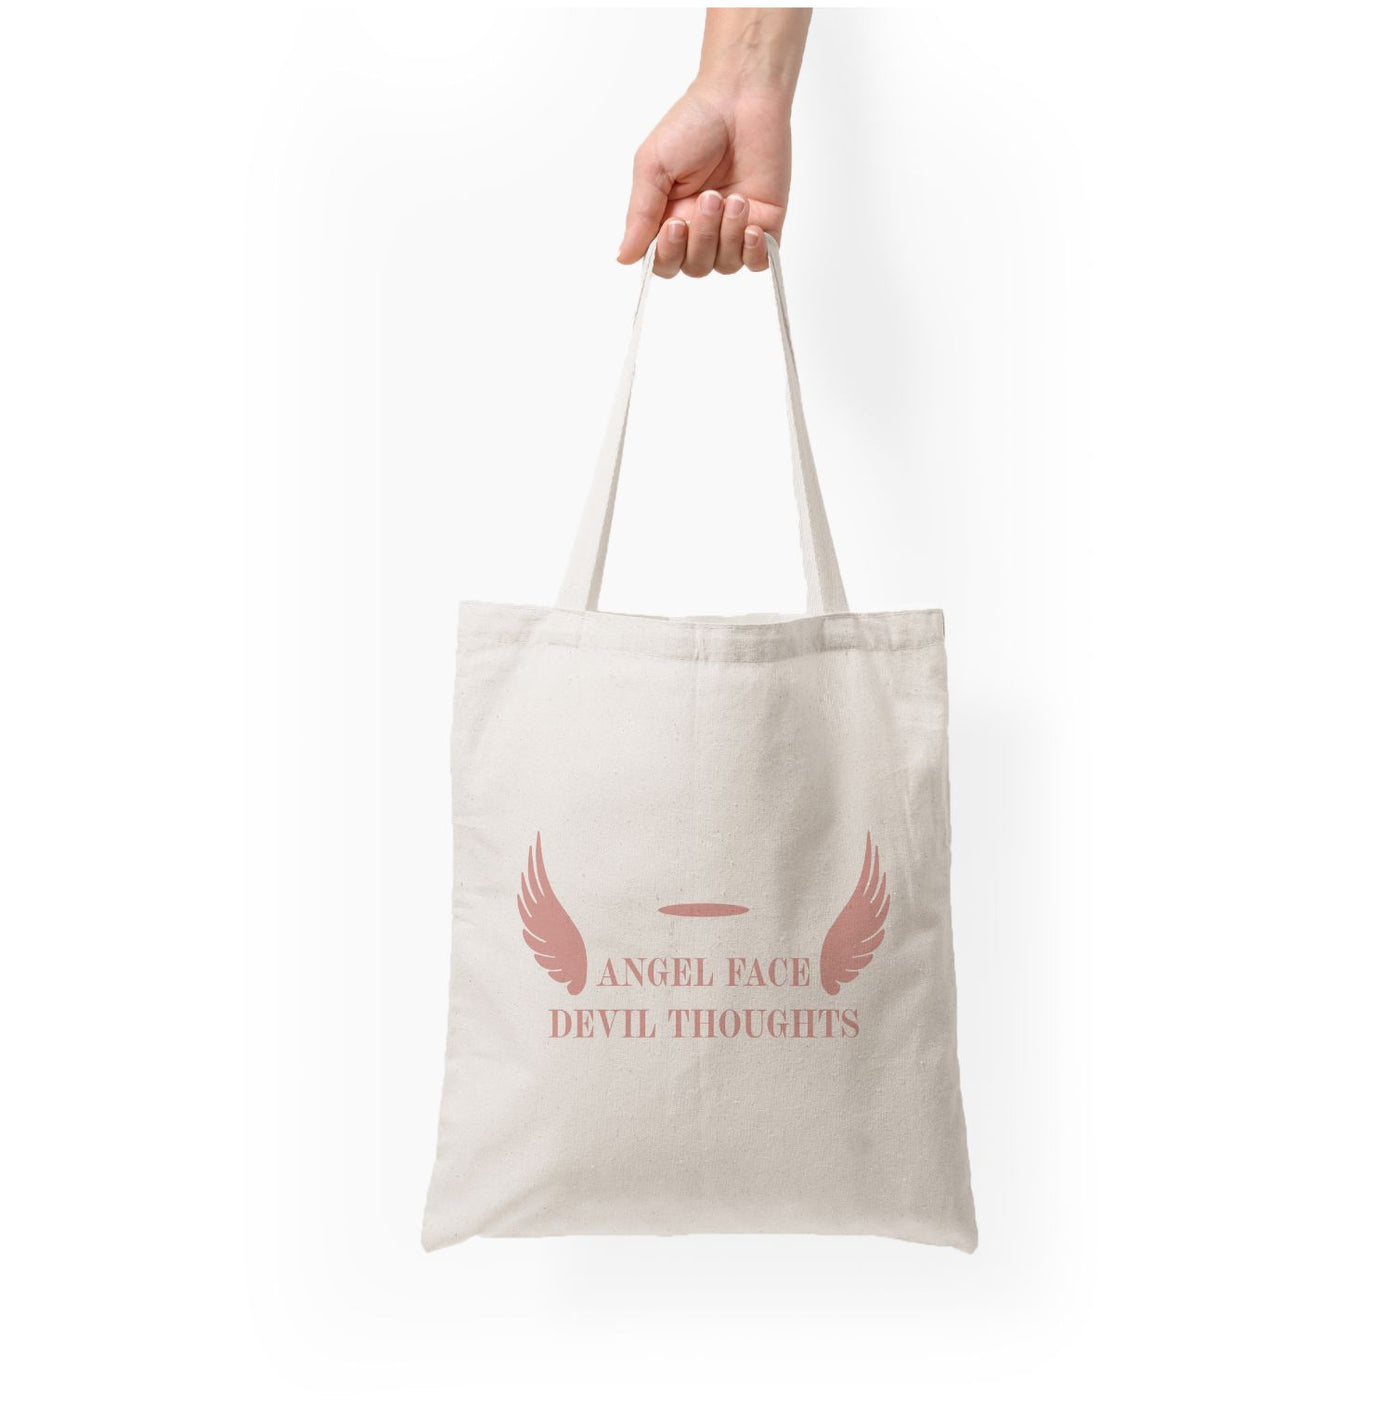 Angel Face Devil Thoughts Tote Bag